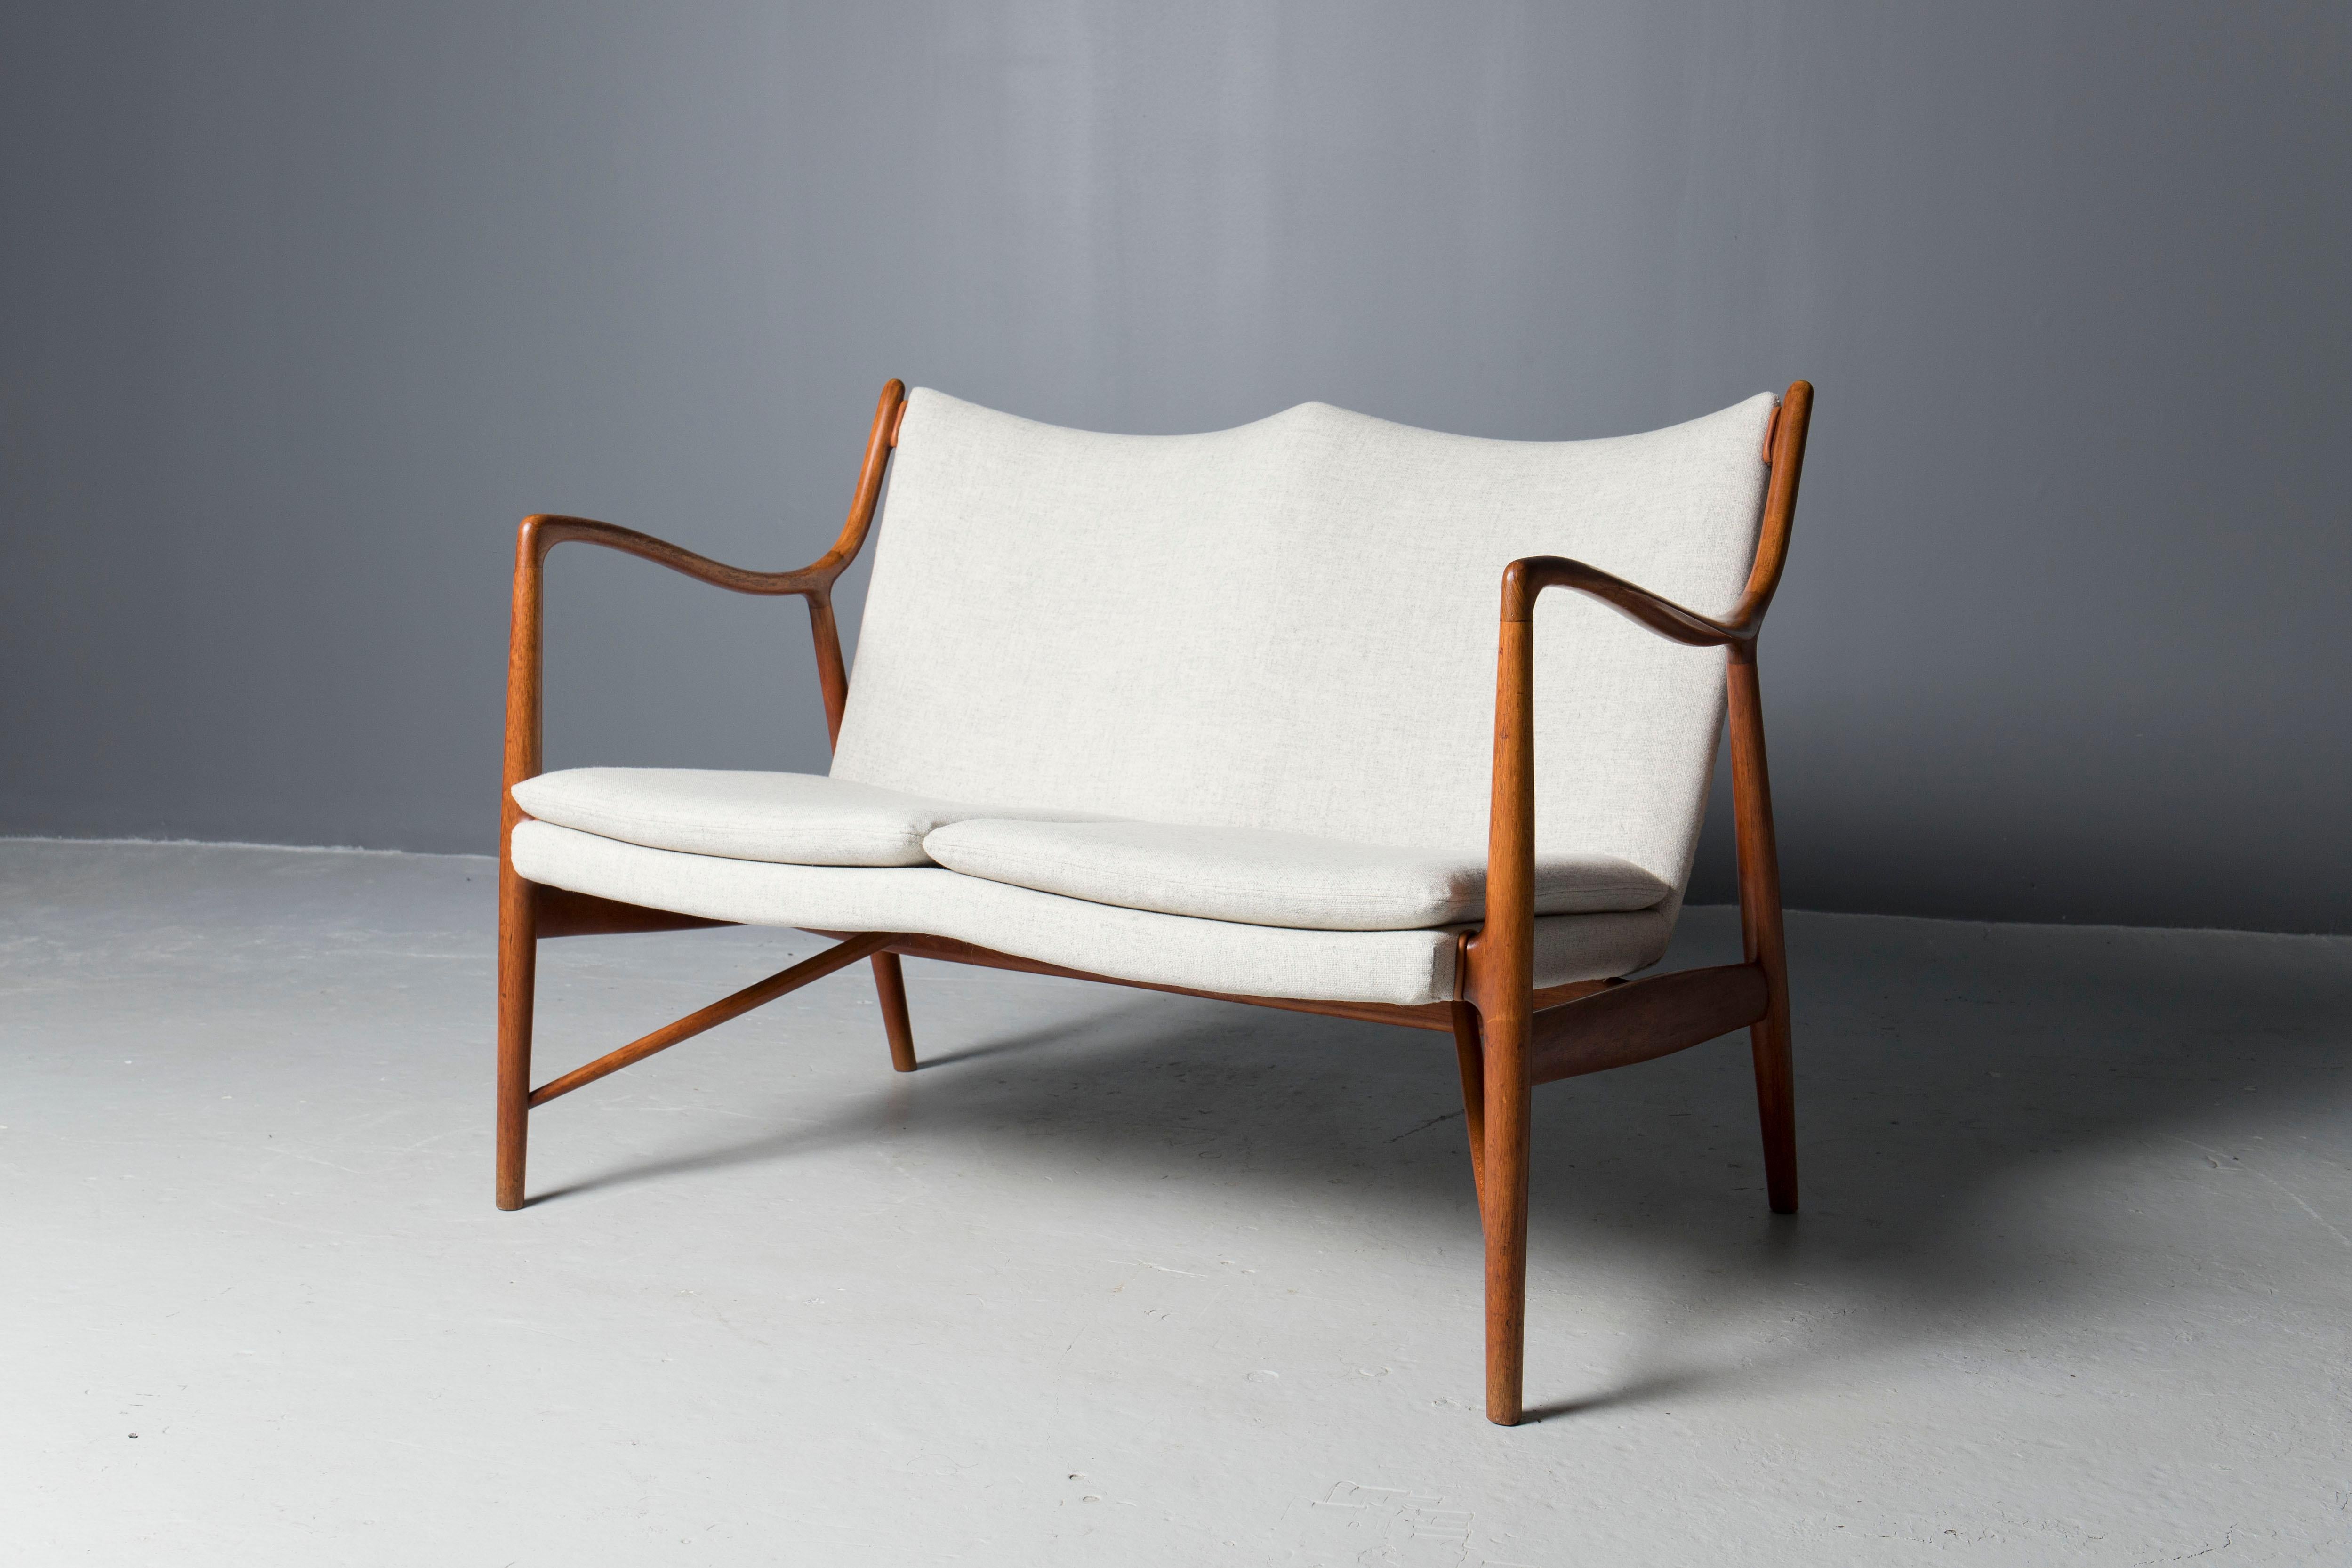 Rare and early model 45 settee, designed by Danish architect Finn Juhl and executed by Niels Vodder in the early 1950s.
Sculptural teak frame has been professionally cleaned and oiled, upholstery has been updated with danish wool.
Settee is